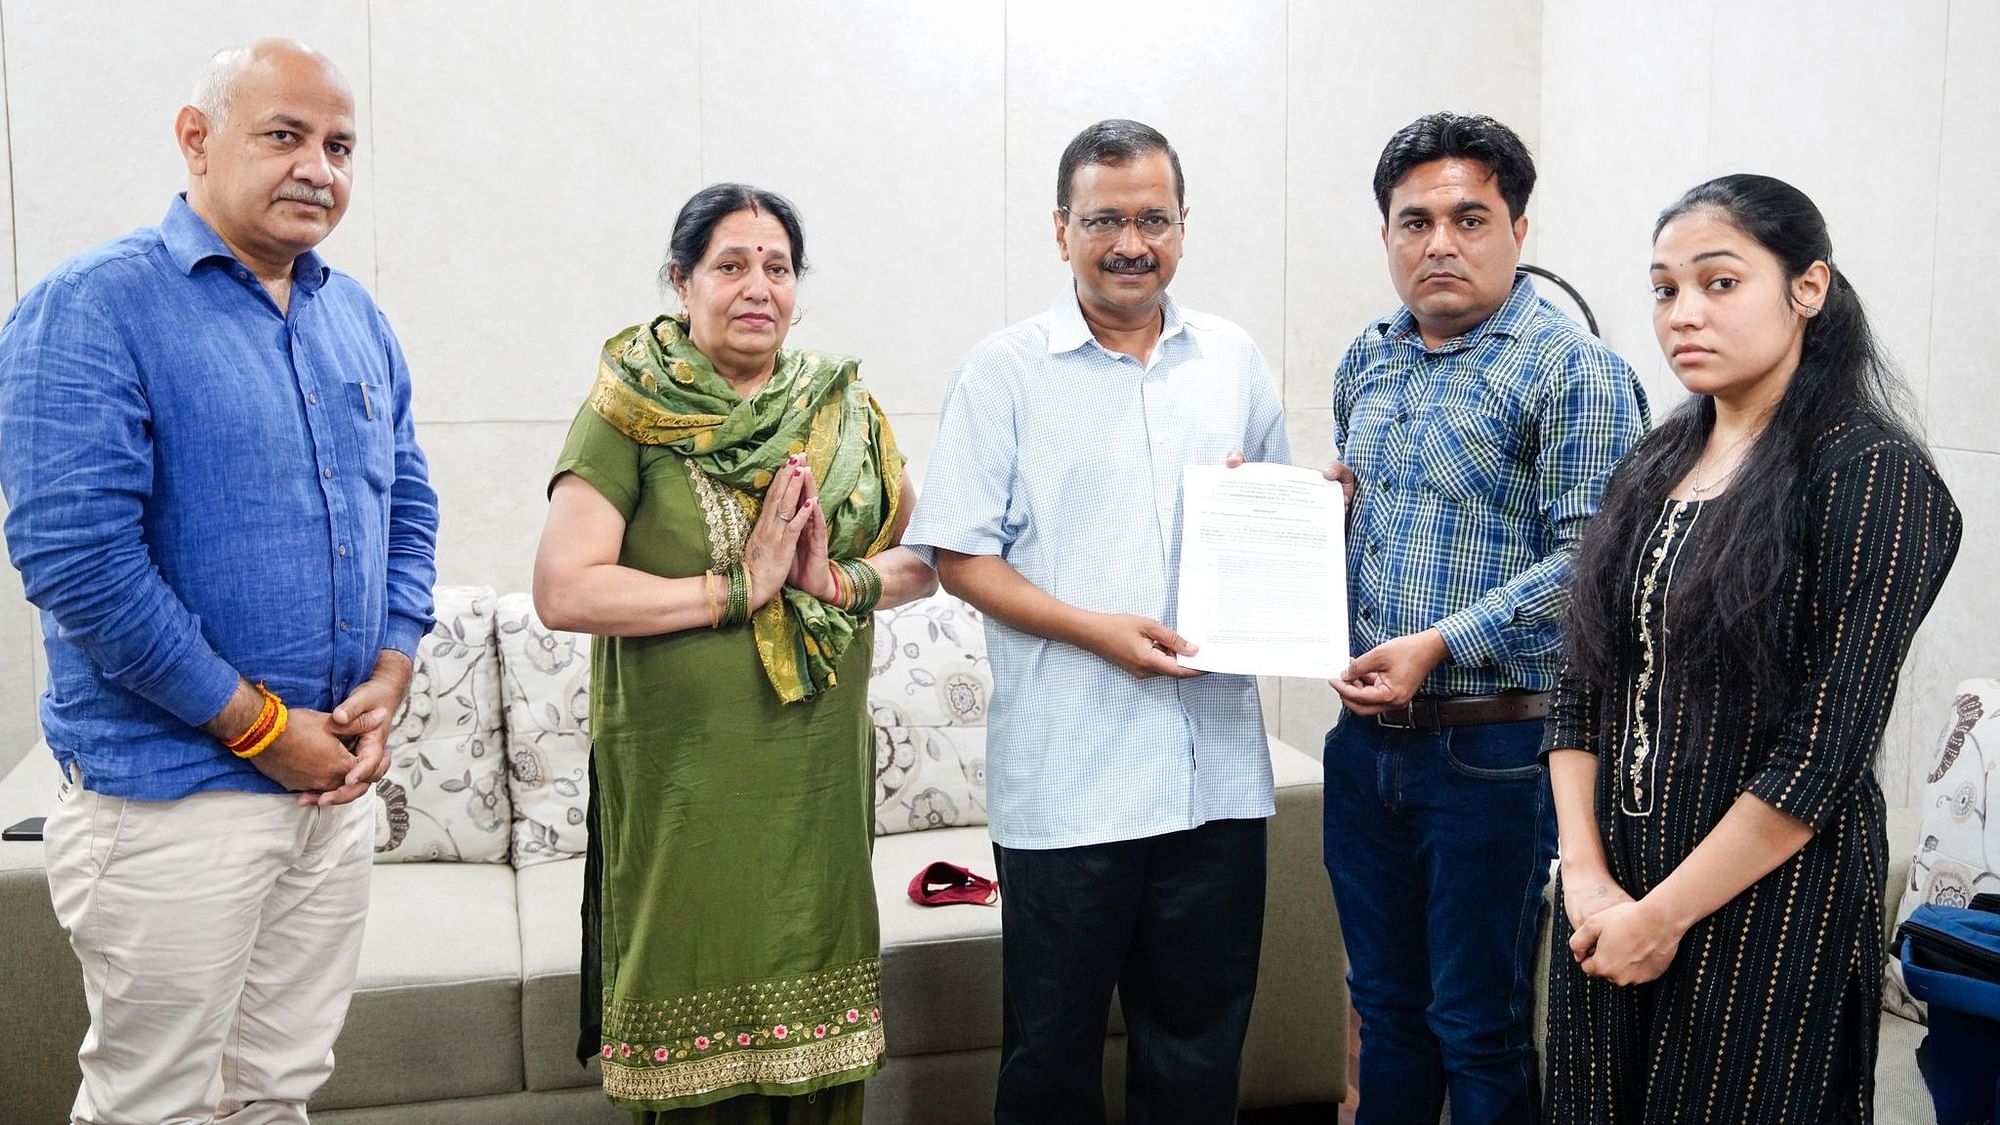 <div class="paragraphs"><p>Congratulating Ankur Sharma on the government job, CM Arvind Kejriwal and Deputy CM Manish Sisodia wished him a bright future and asked him to join as soon as possible.</p></div>